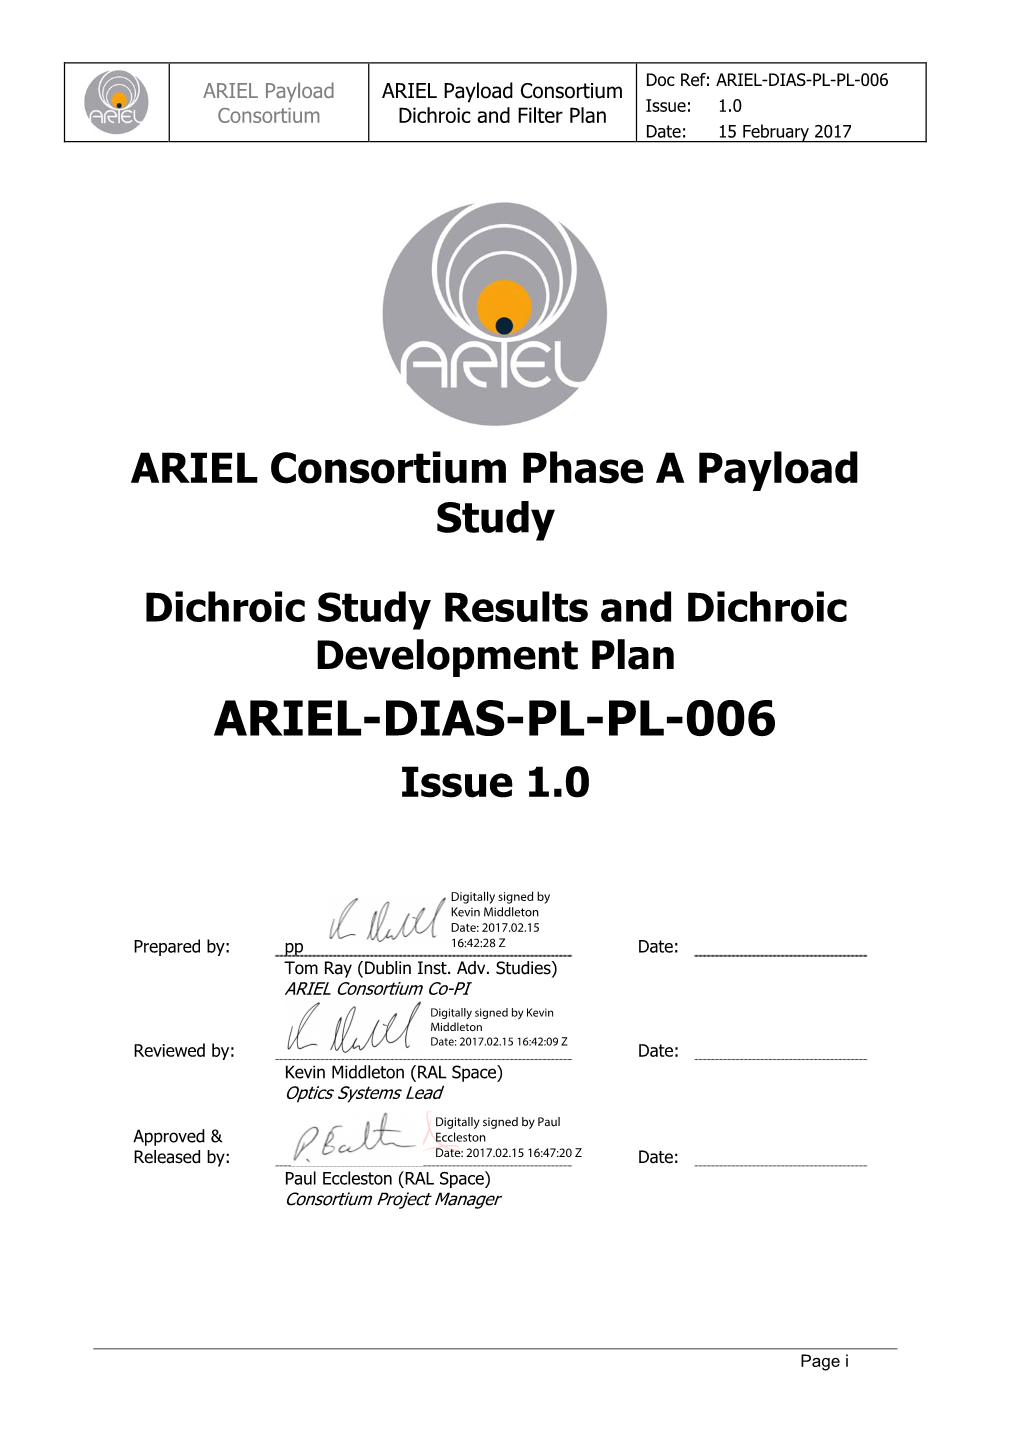 ARIEL-DIAS-PL-PL-006 ARIEL Payload ARIEL Payload Consortium Consortium Dichroic and Filter Plan Issue: 1.0 Date: 15 February 2017